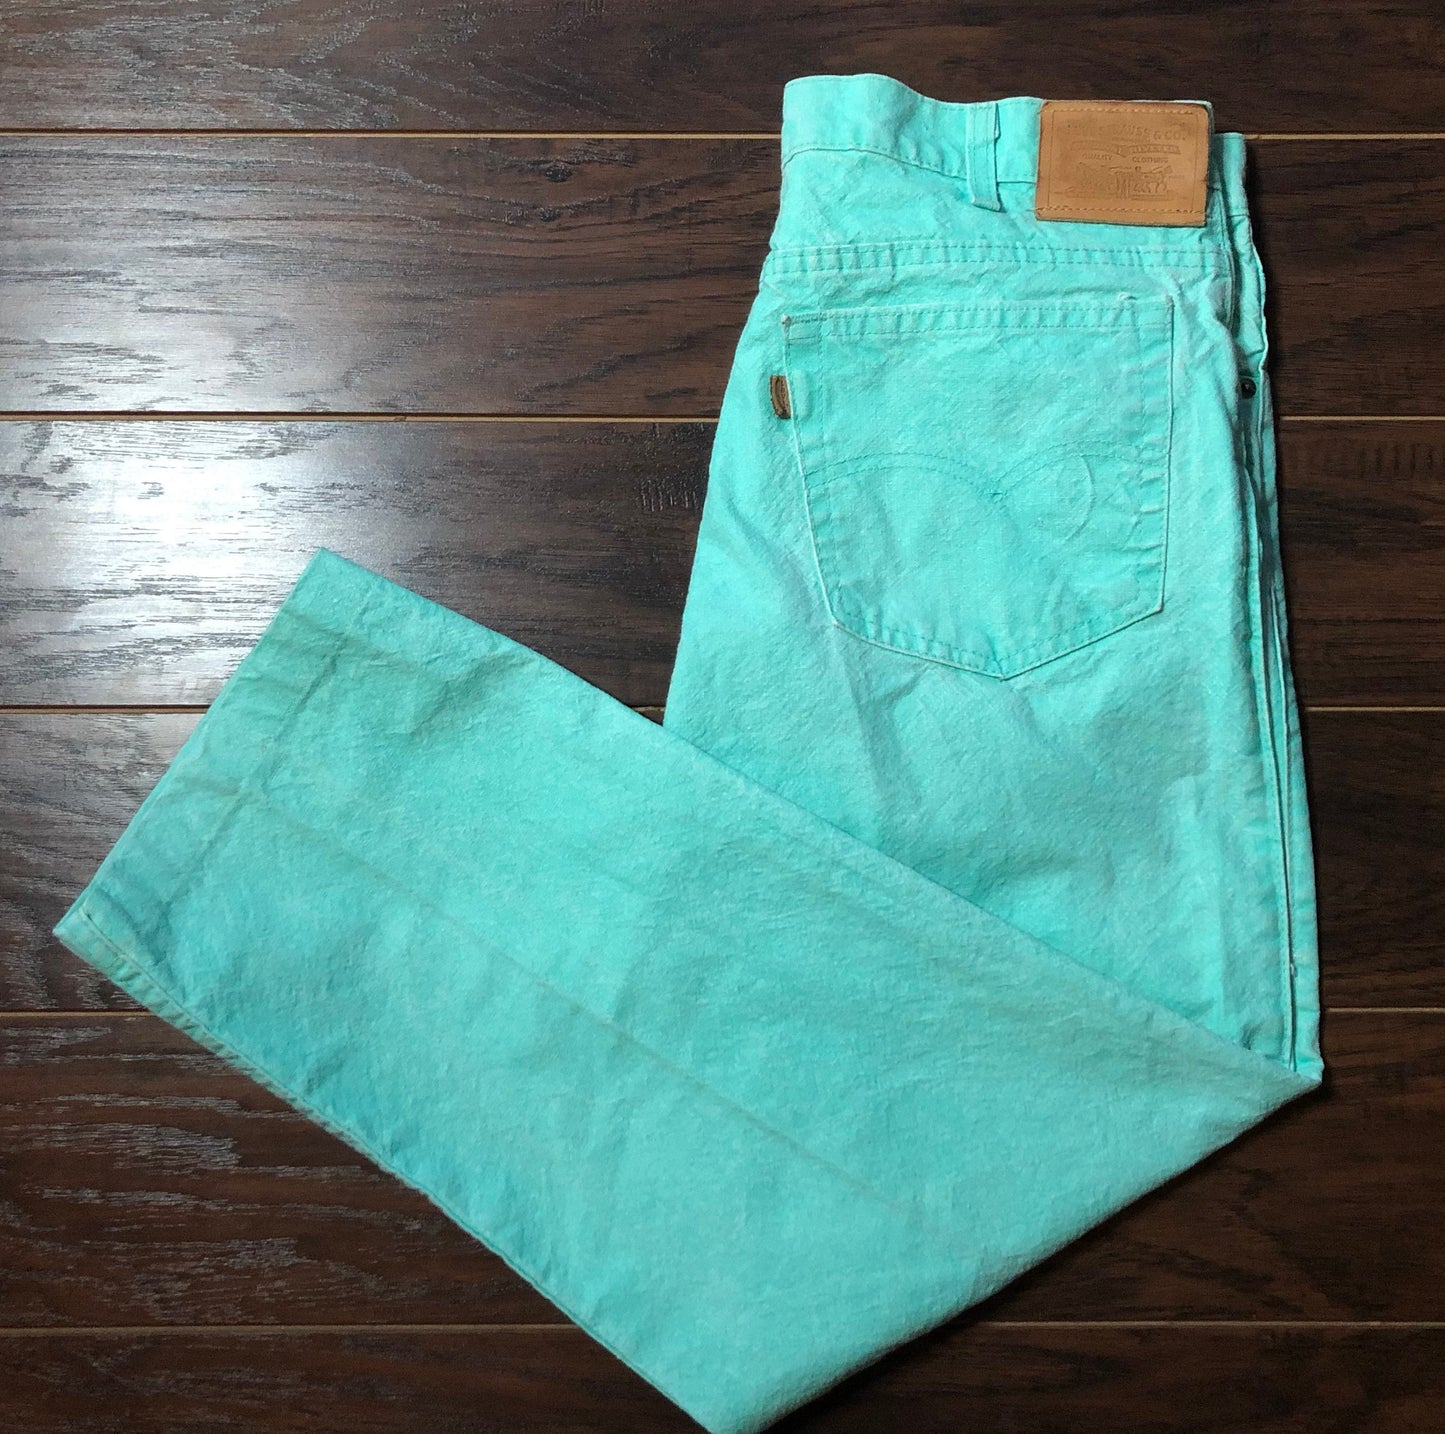 90’s Vintage Western Women’s Levi’s Two Horse Brand Jeans